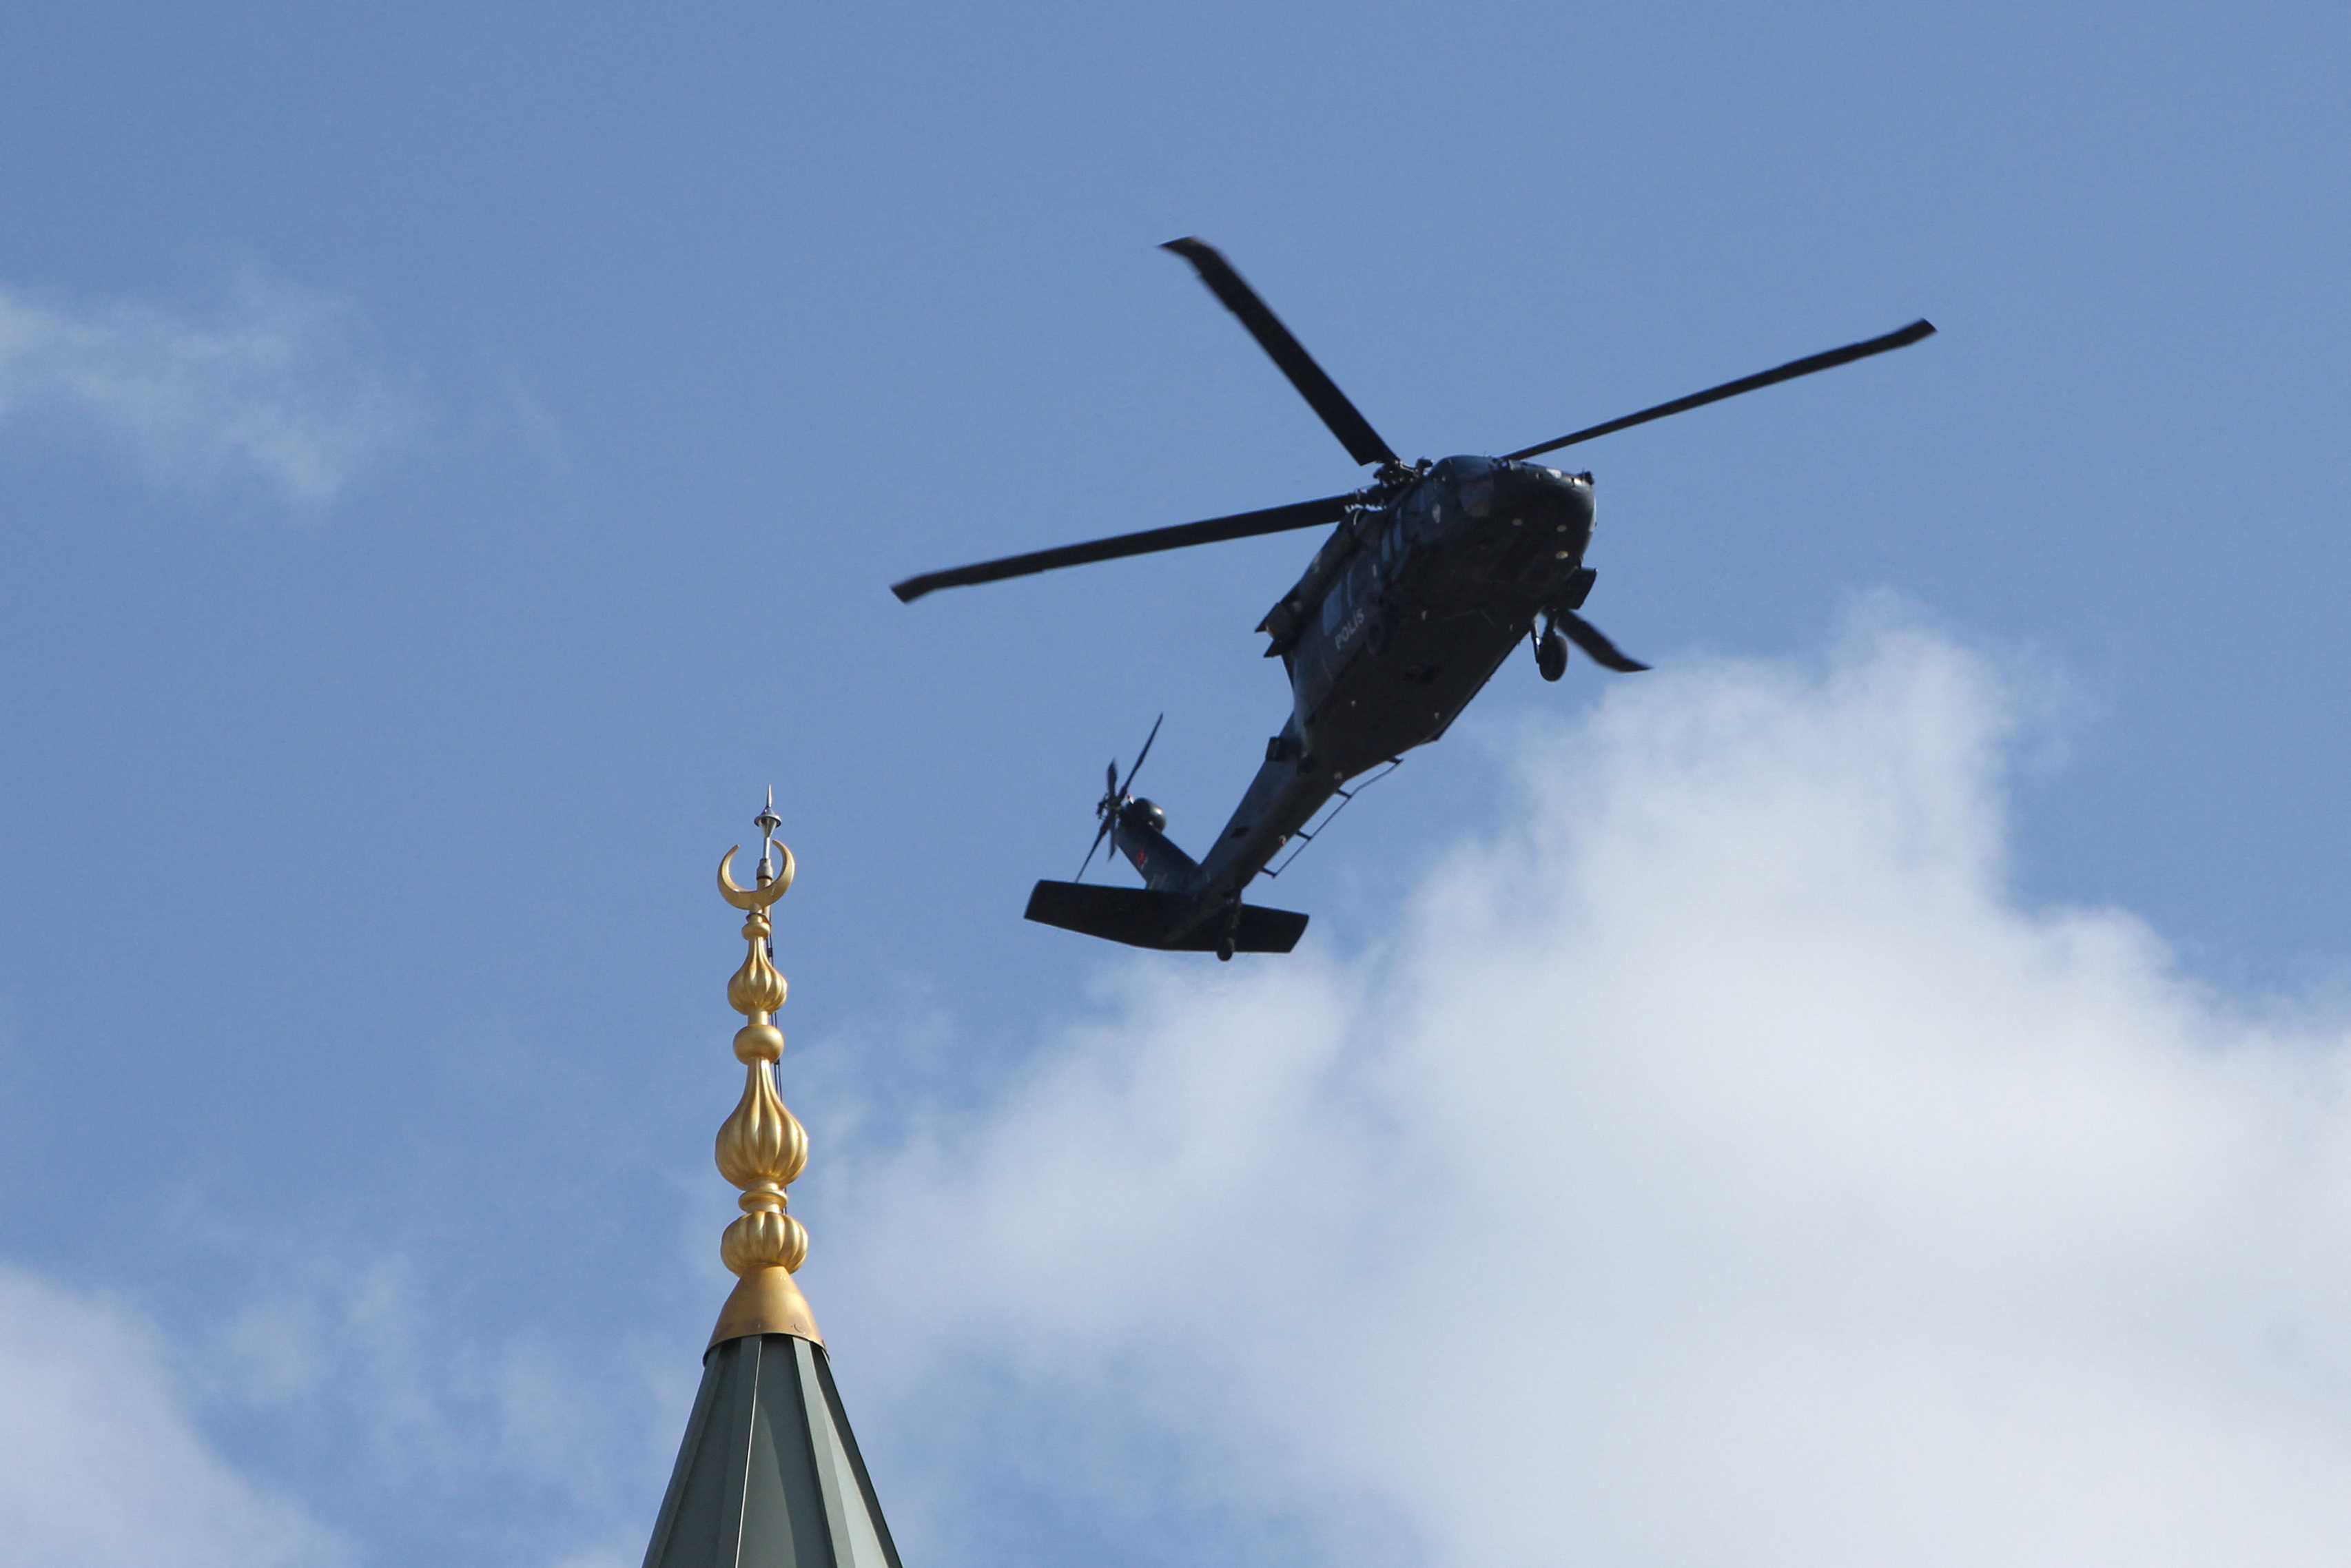 A police helicopter flies over a mosque in Diyarbakir, Turkey April 14. Photo: Reuters